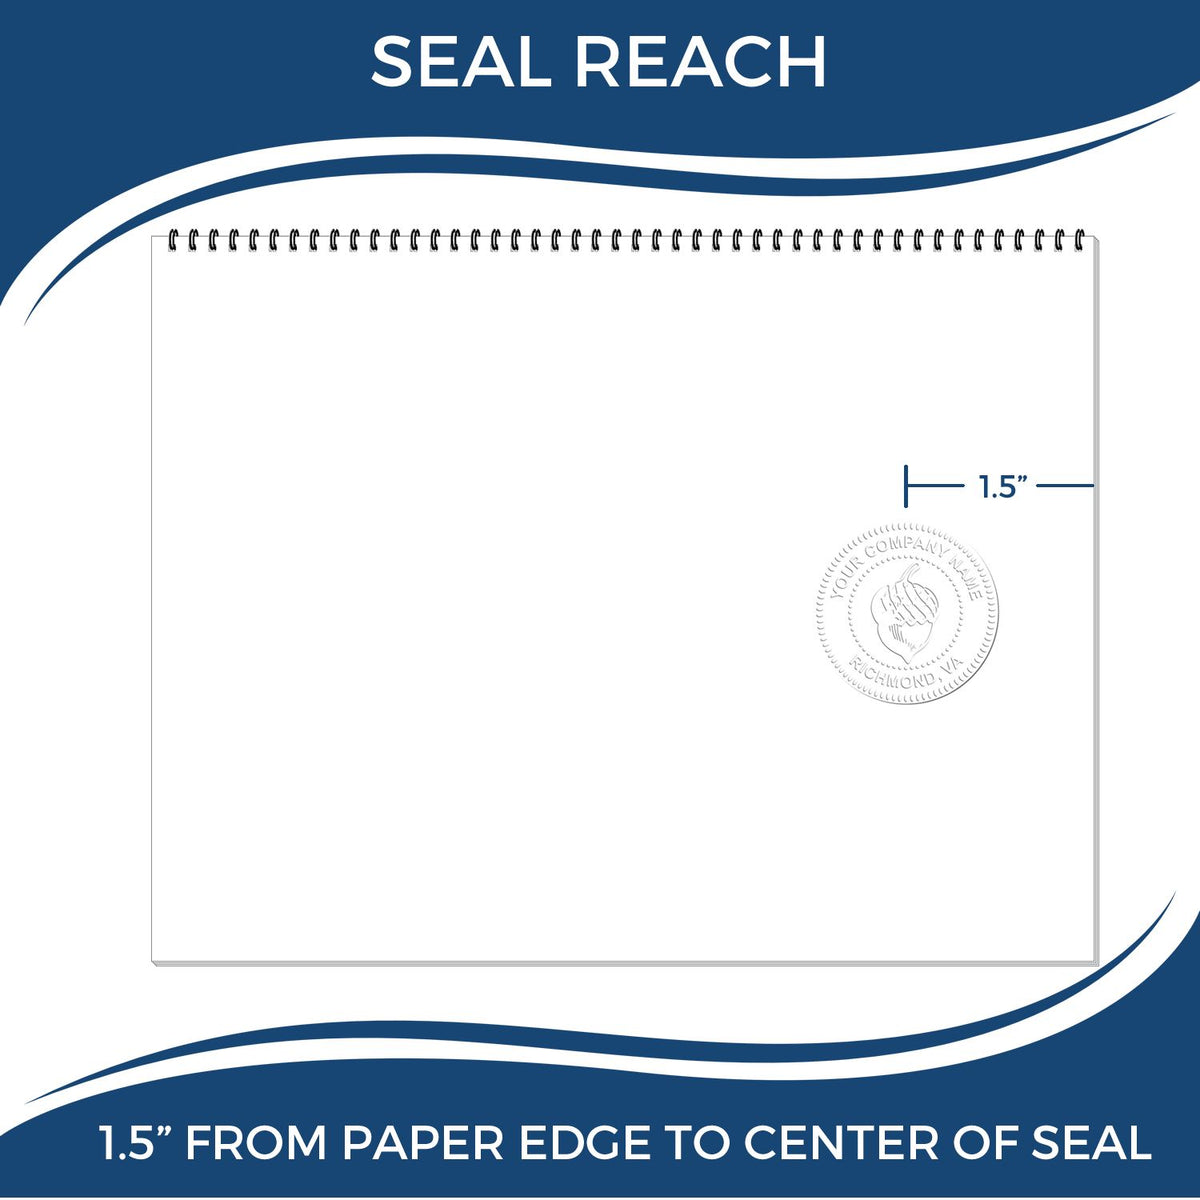 An infographic showing the seal reach which is represented by a ruler and a miniature seal image of the Handheld Oklahoma Architect Seal Embosser